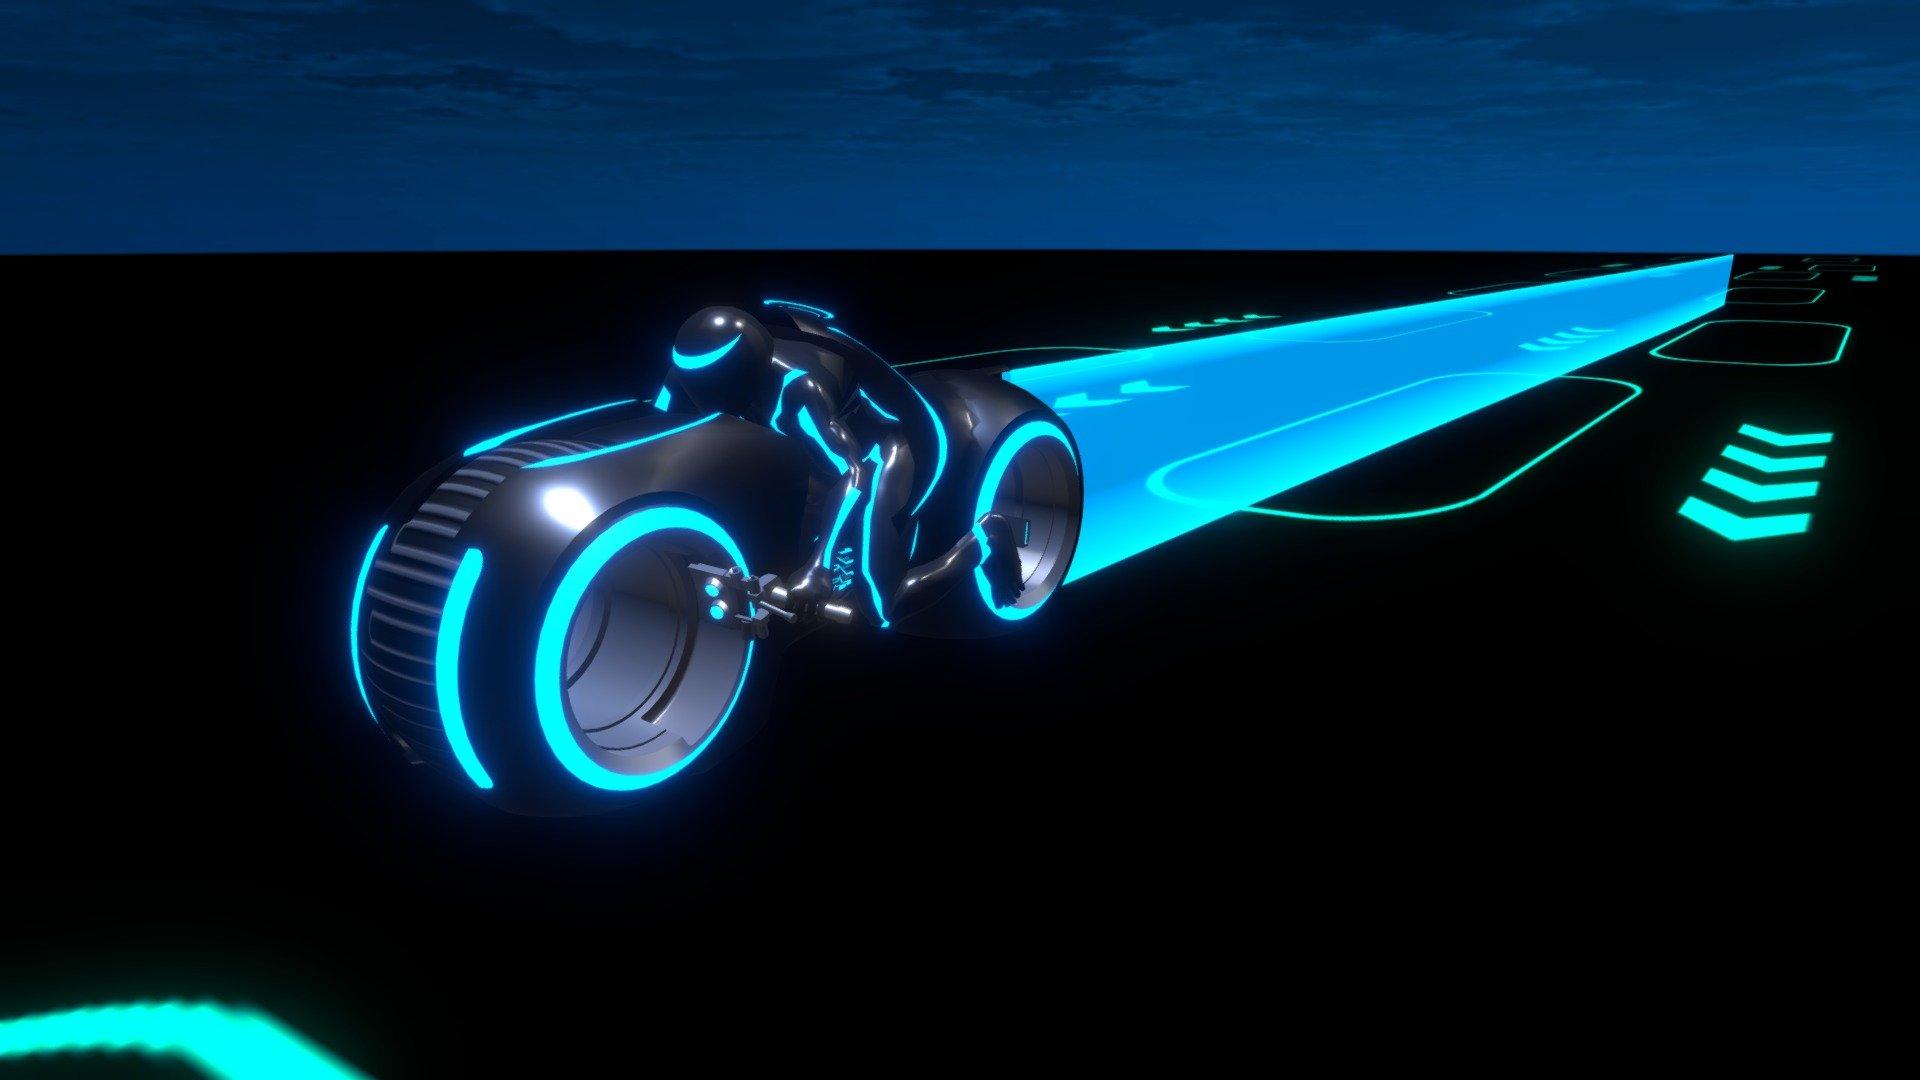 Lightcycle animation scene from Tron Legacy movie - Tron Lightcycle Animation - Buy Royalty Free 3D model by jonathanborges3d 3d model